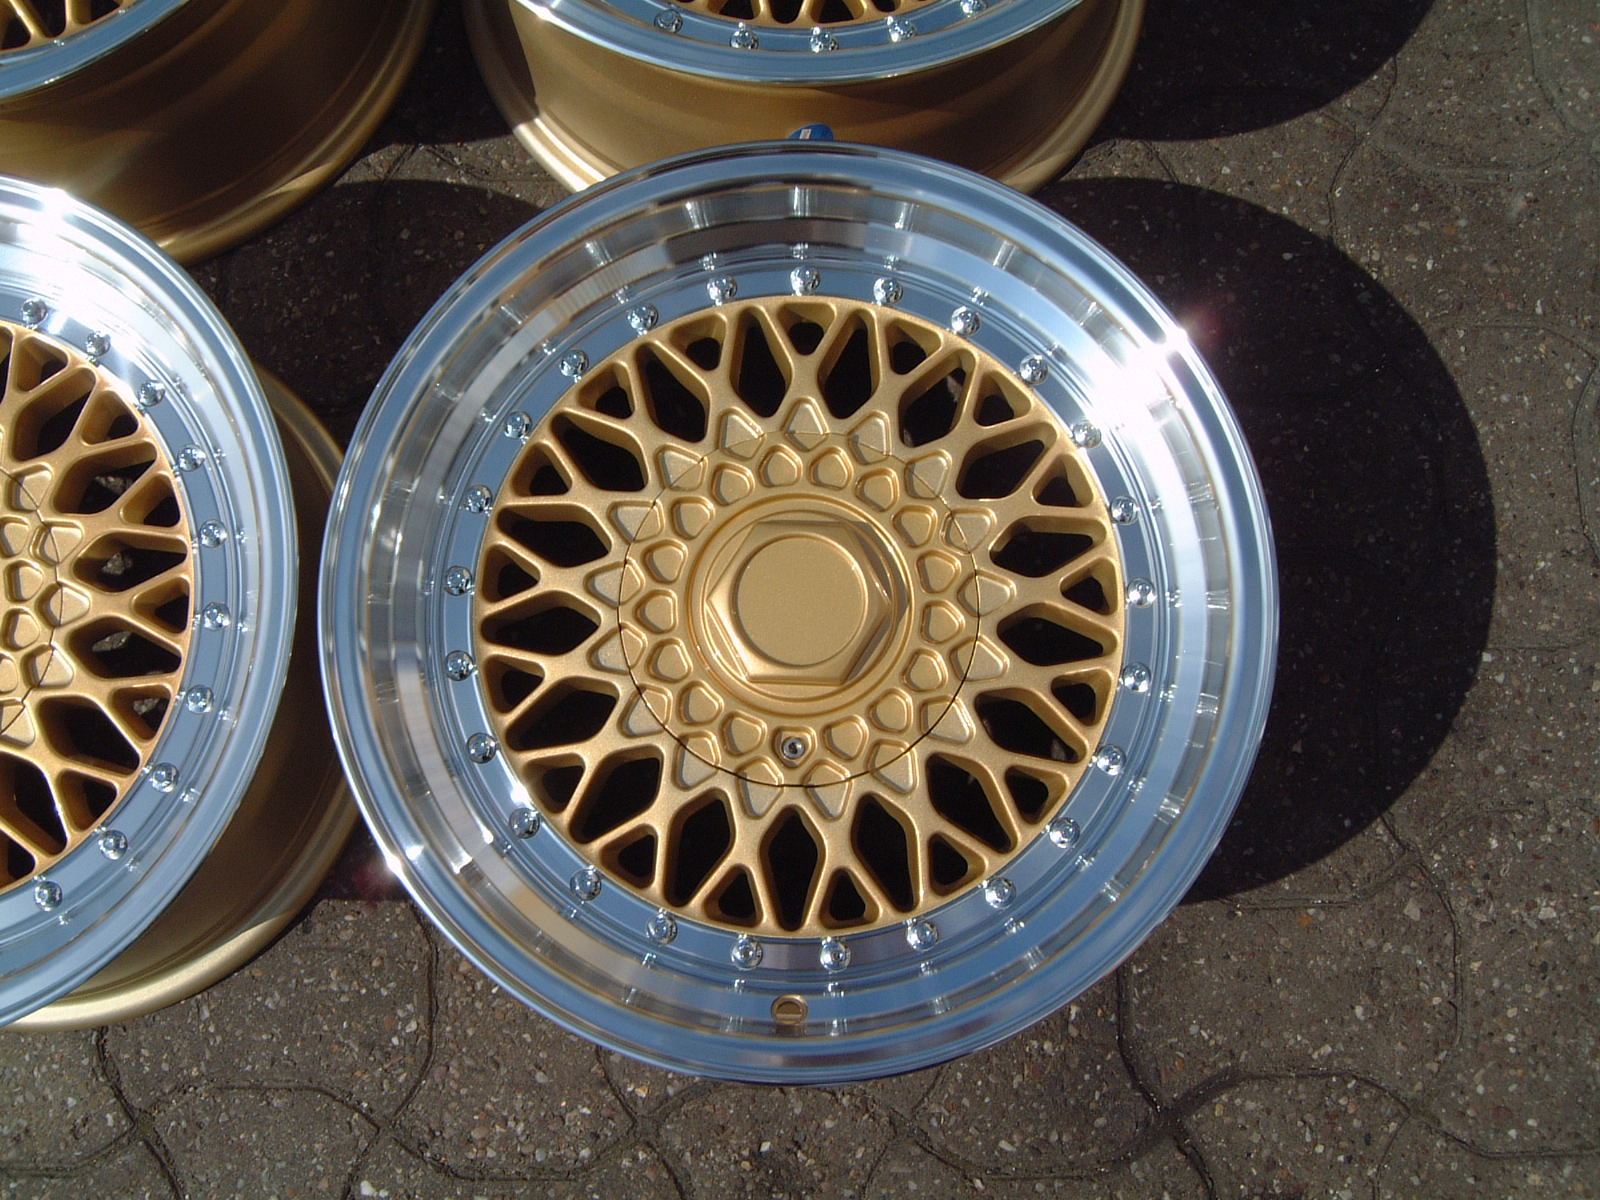 NEW 16  DARE RS ALLOY WHEELS GOLD POLISHED FINISH WITH CHROME RIVETS  9  DEEPER REAR